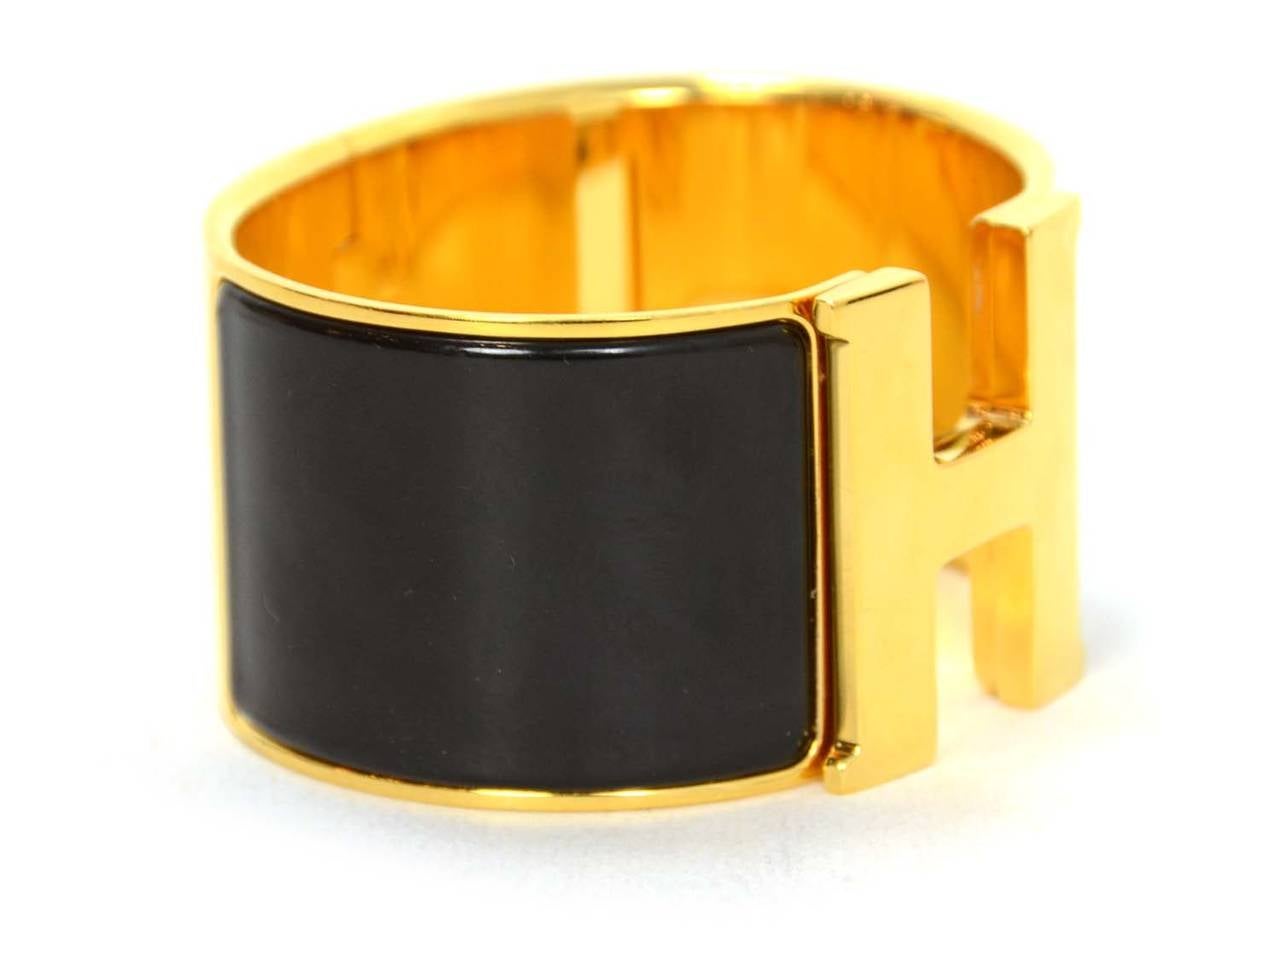 HERMES Black and Gold Extra-Wide Clic-Clac H Bracelet

-Made in: France
-Stamp: HERMES Made In France
-Closure: Classic clic-clac closure
-Color: Black and gold
-Materials: Enamel and Metal
-Overall Condition: Excellent pre-owned condition,